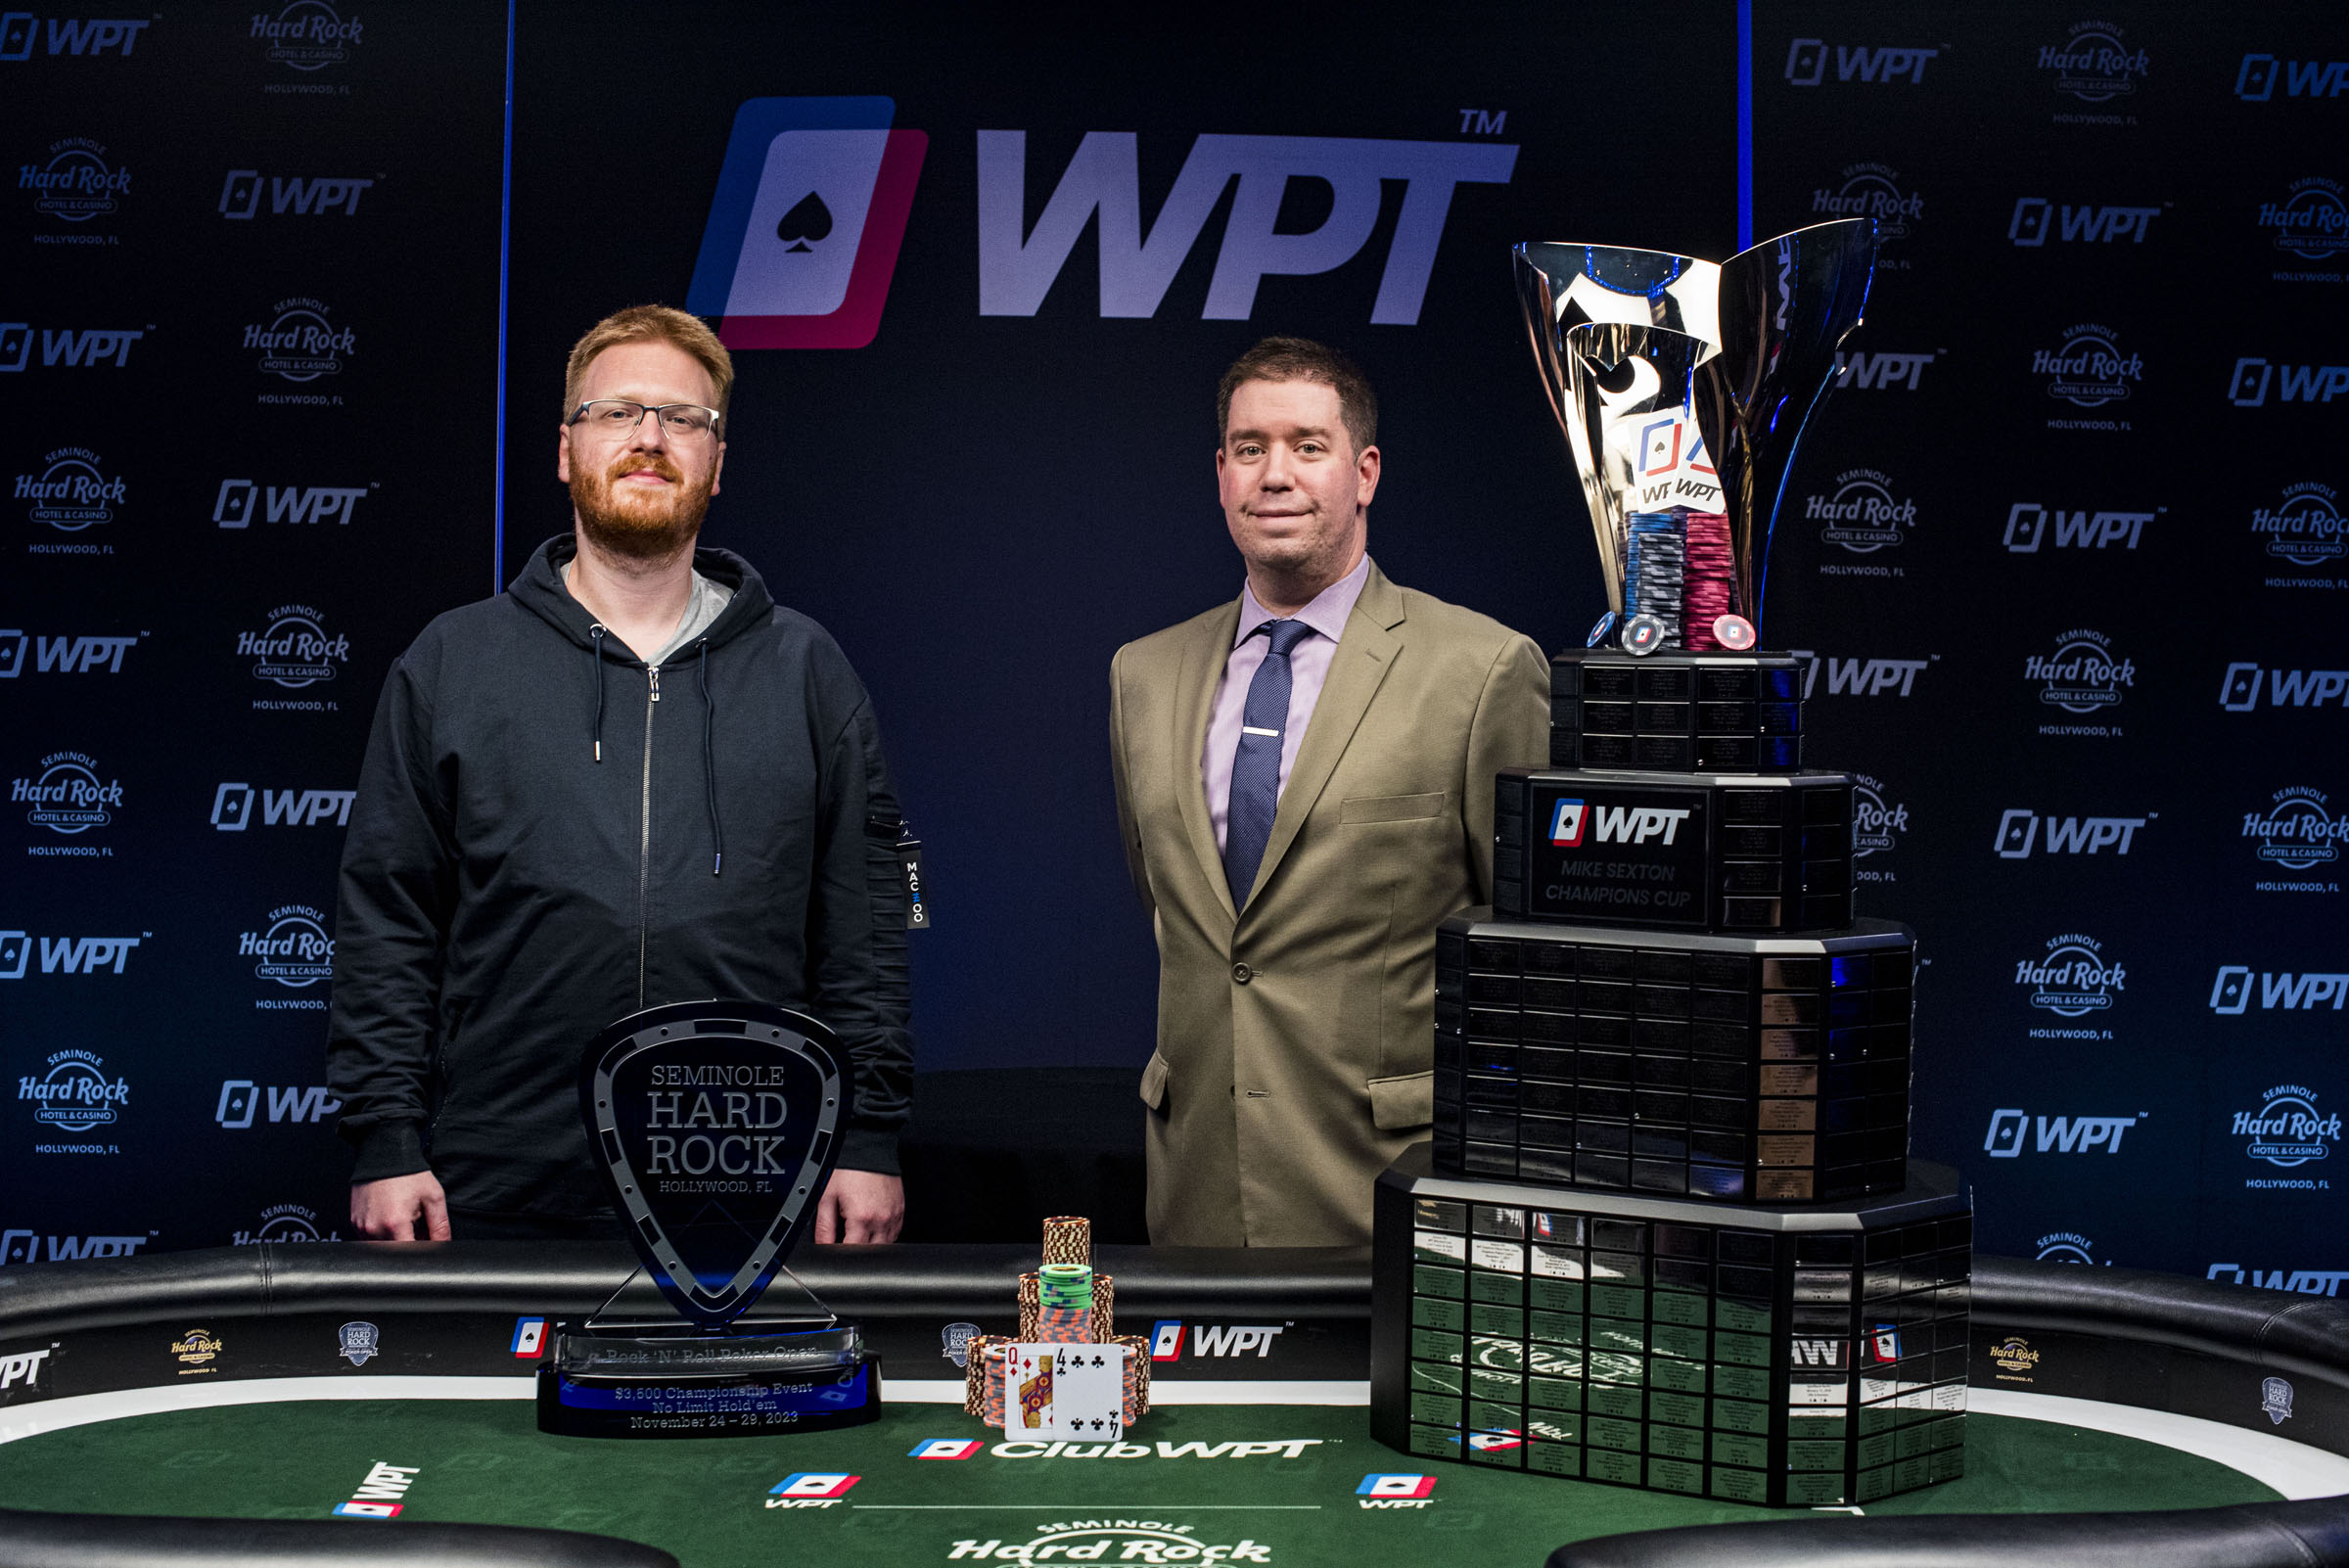 Top US Poker Tournaments in 2022 